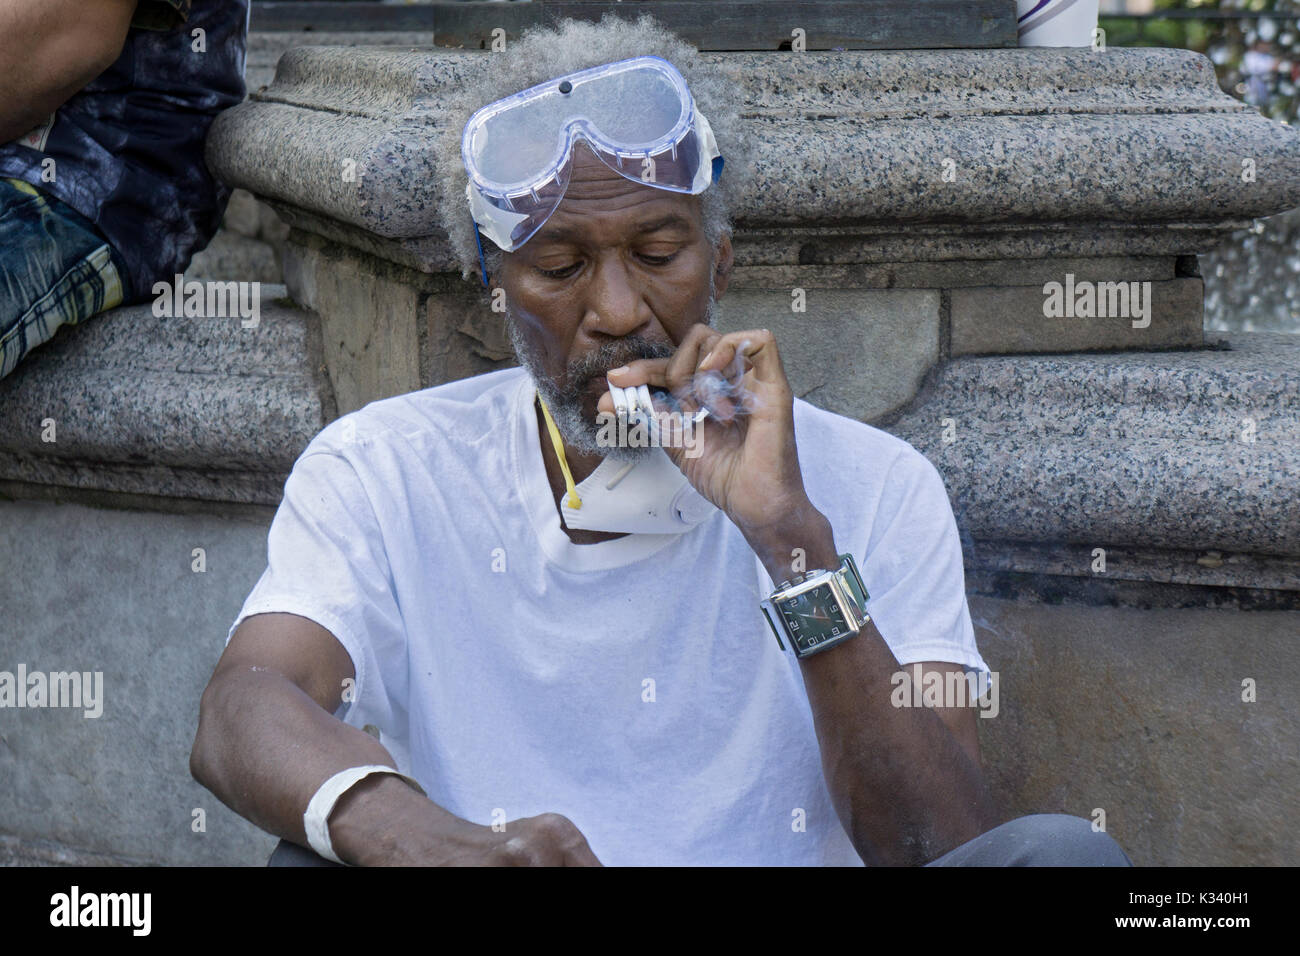 A man smoking three cigarettes at a time while wearing goggles and a face mask, In lower Manhattan, New York Ciy Stock Photo